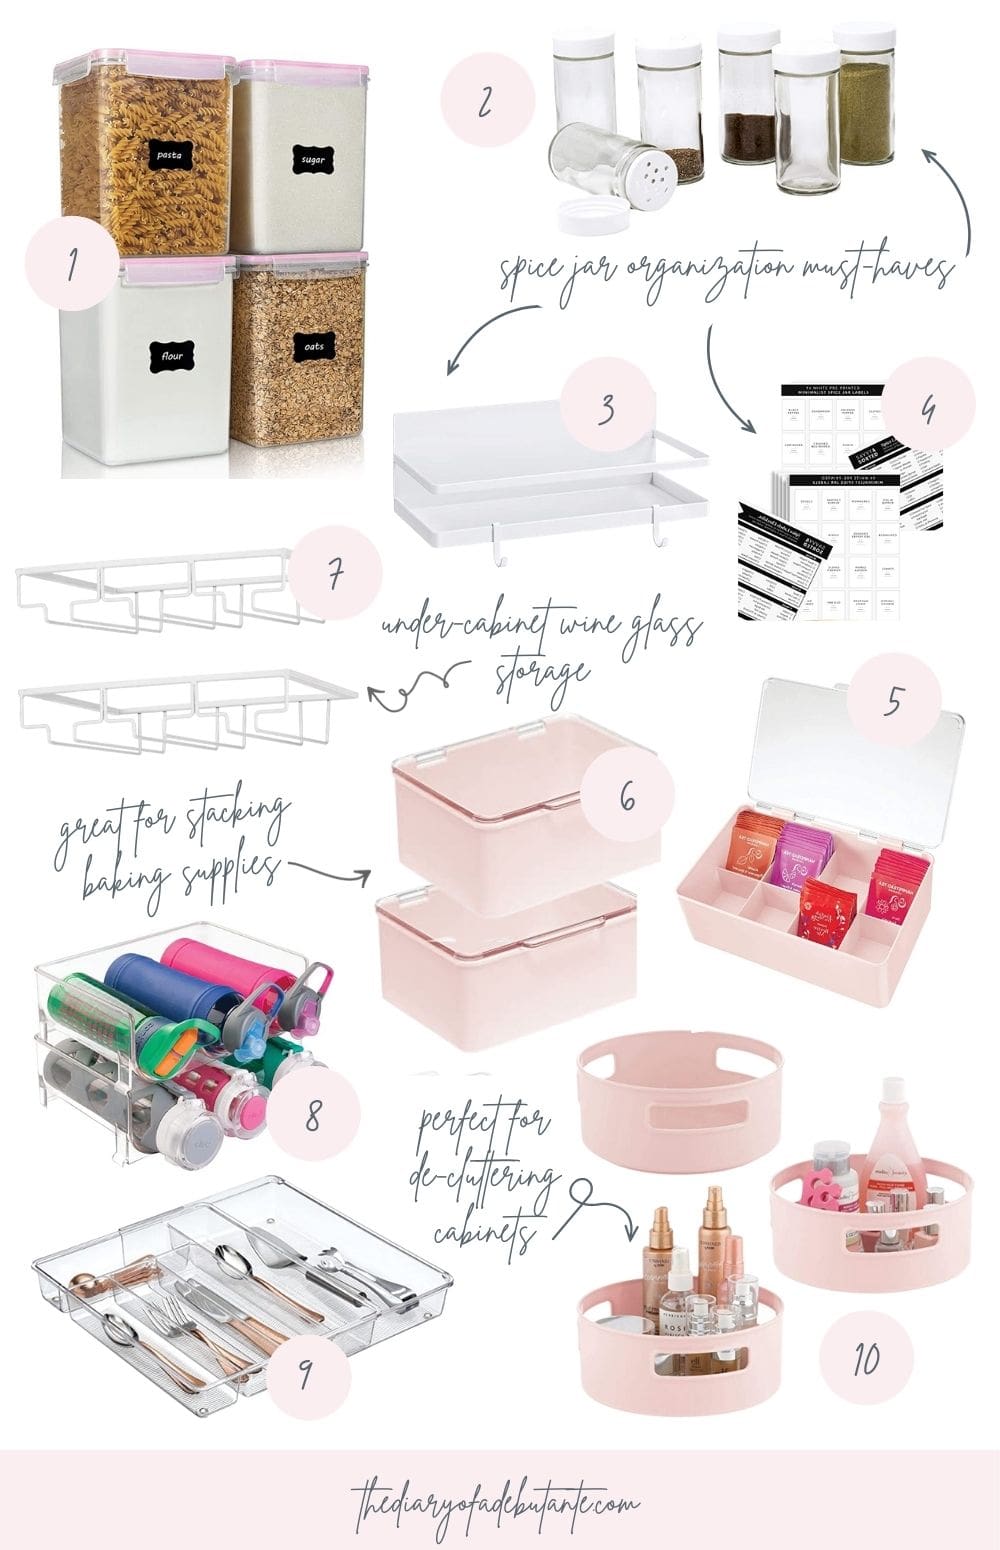 Blogger Stephanie Ziajka shares storage ideas for small kitchens on Diary of a Debutante